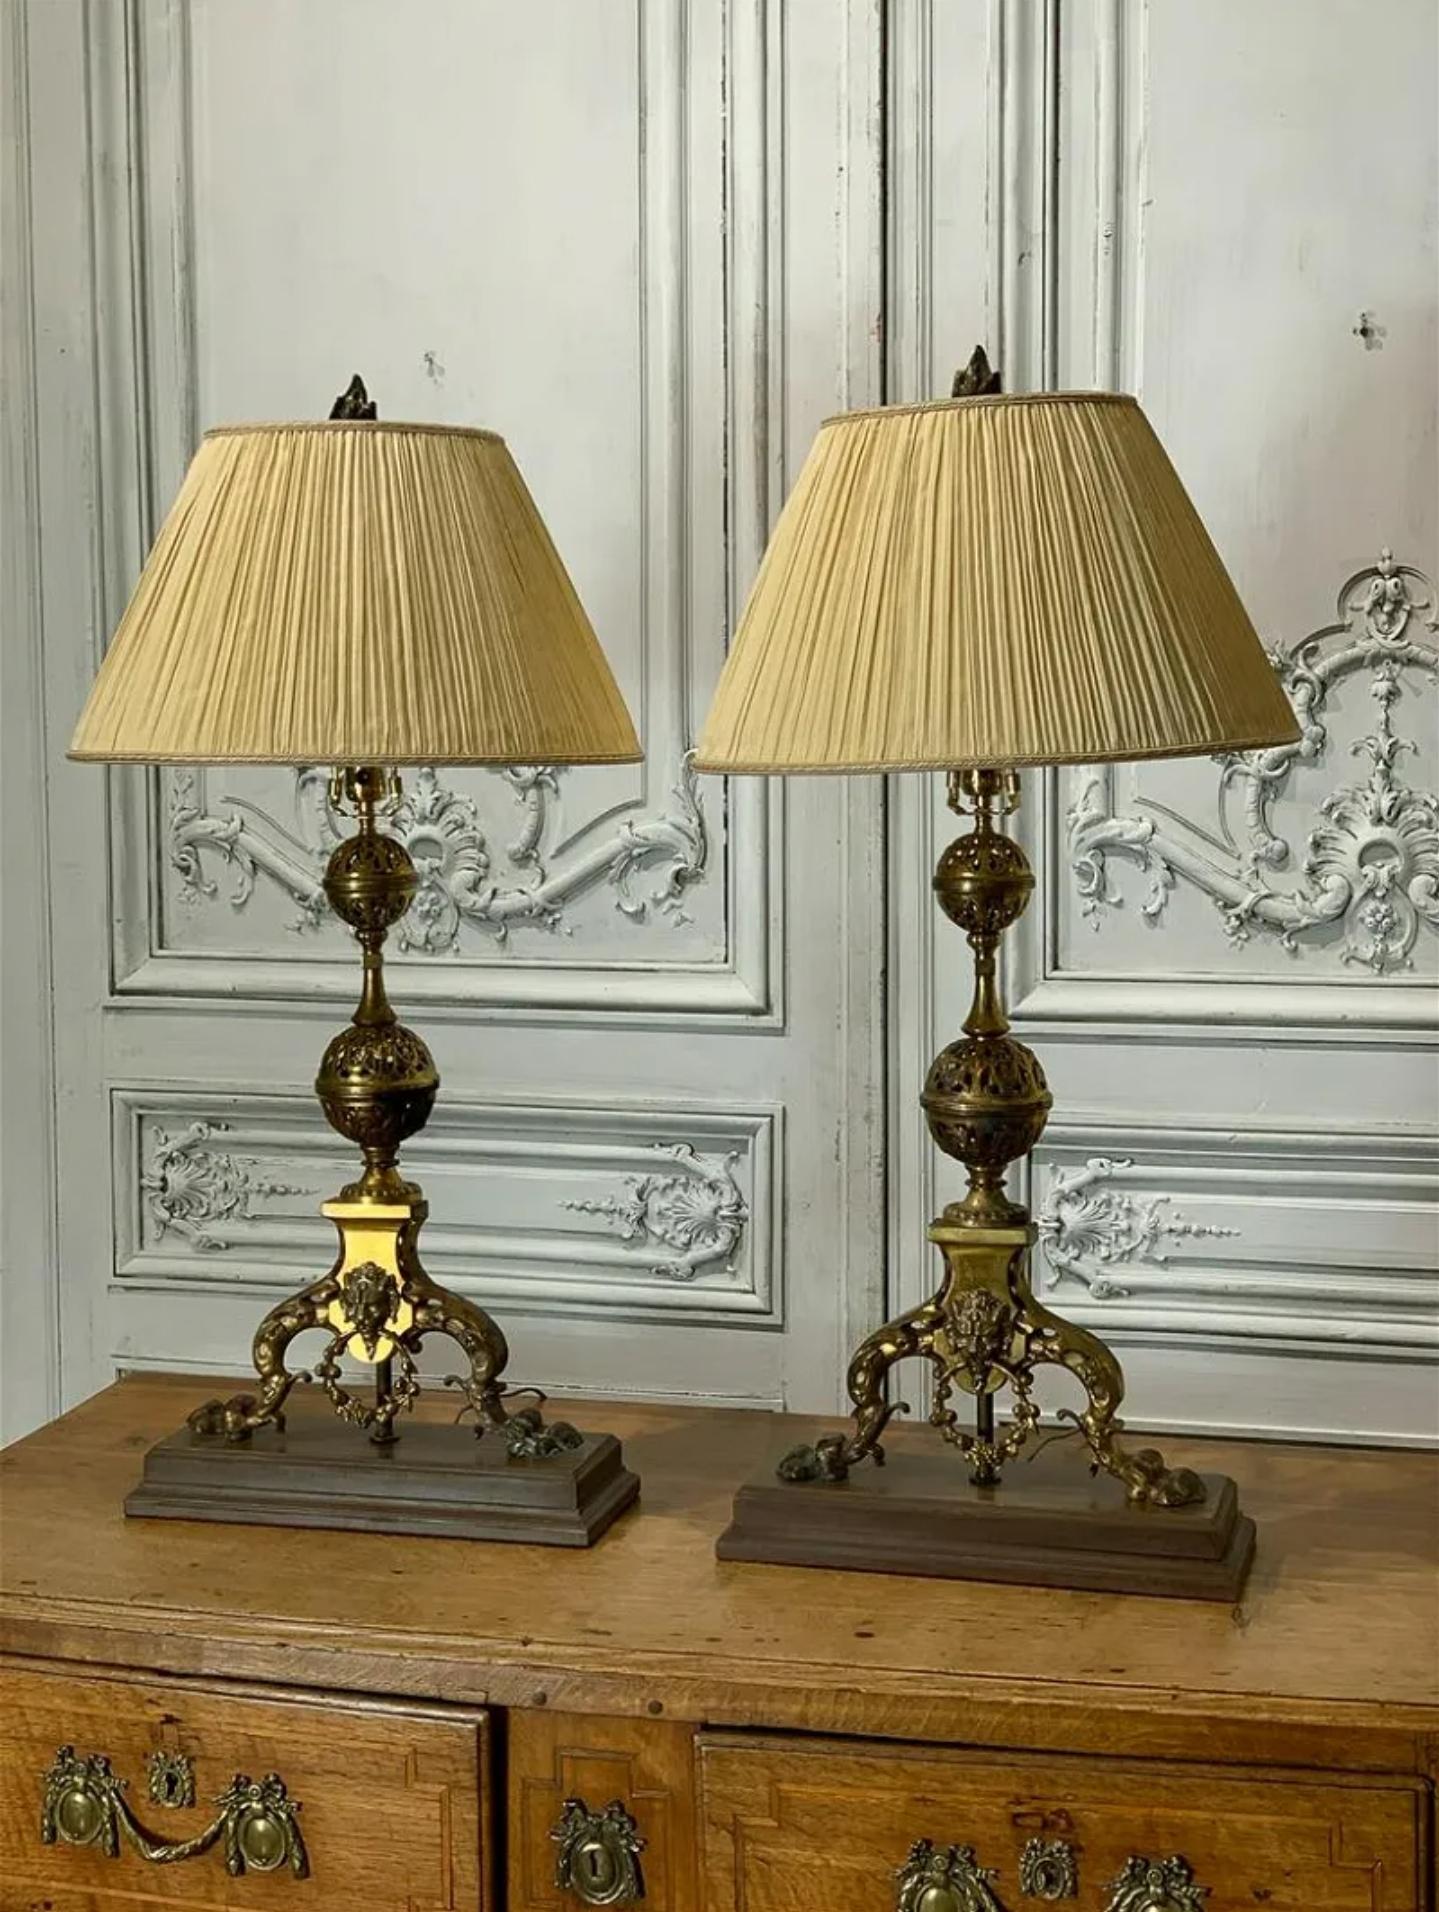 Gilt 19th Century French Gothic Revival Andirons Mounted As Table Lamps - A Pair  For Sale